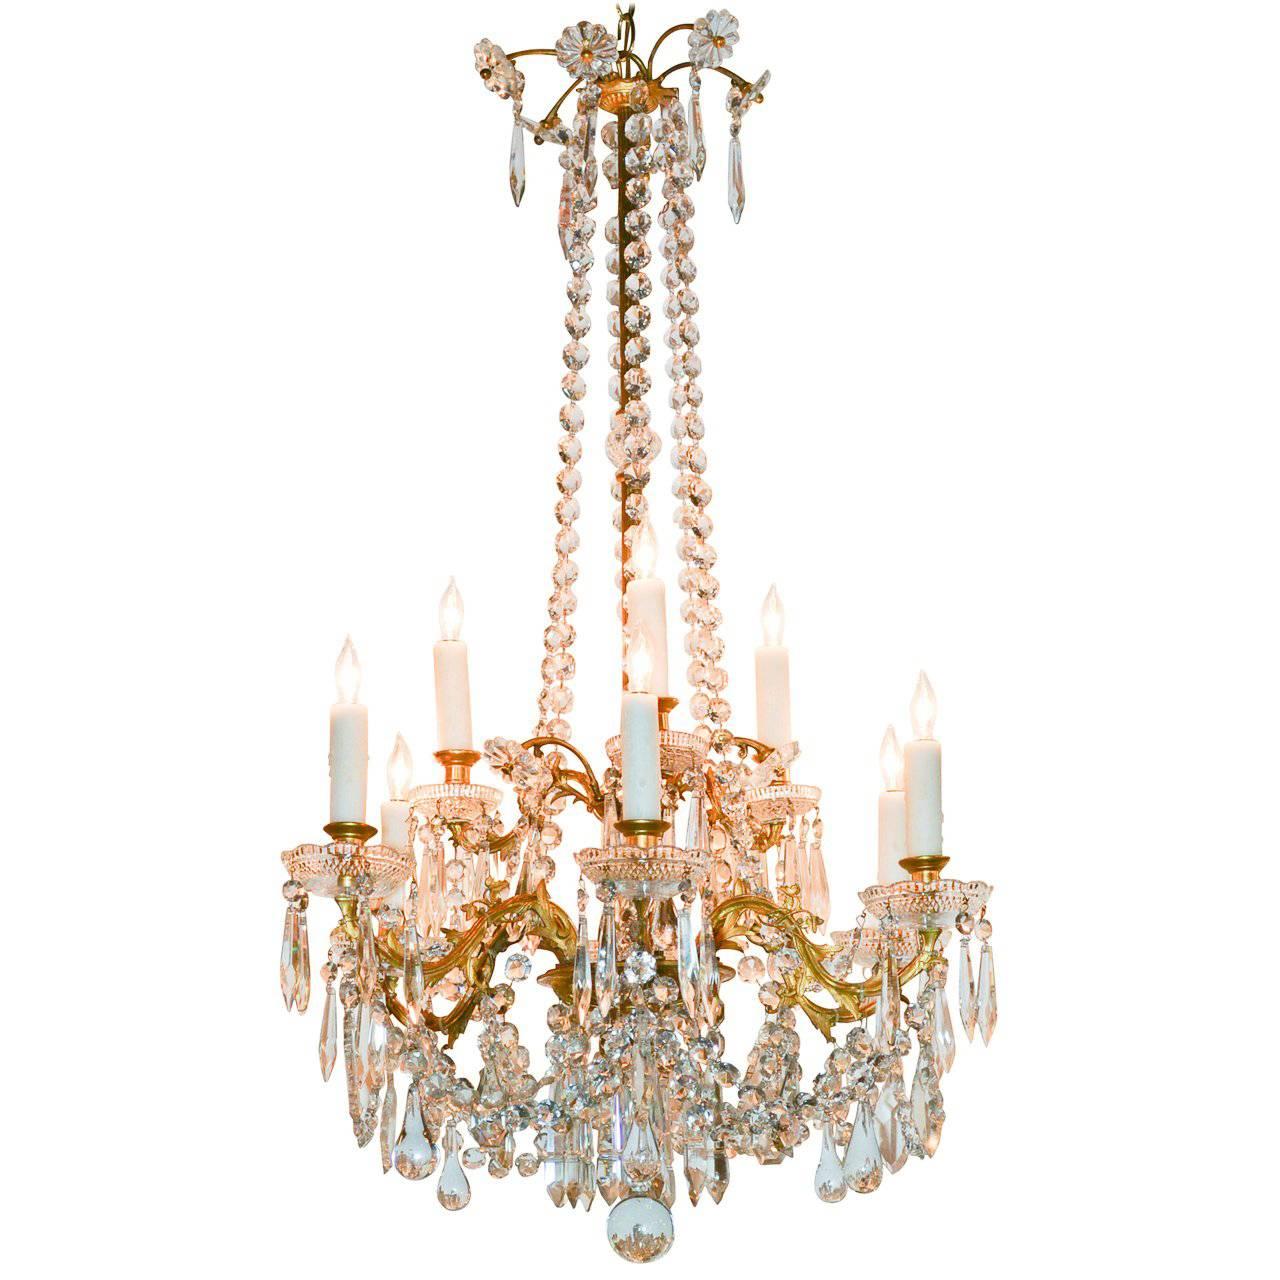 19th Century French Baccarat Chandelier